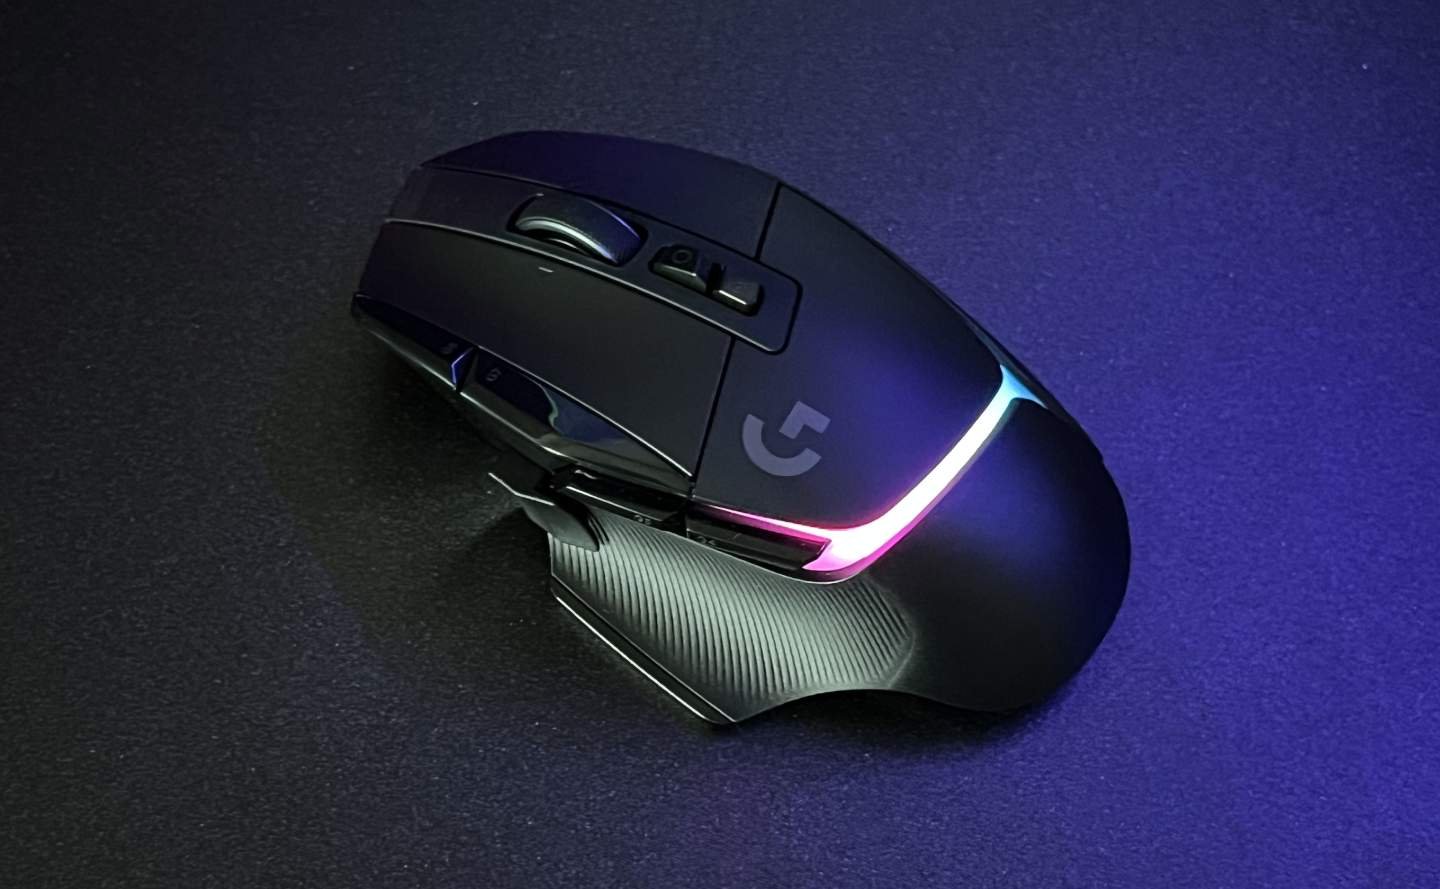 Logitech G502 11 Button Mouse with LIGHTSYNC - USB Wired